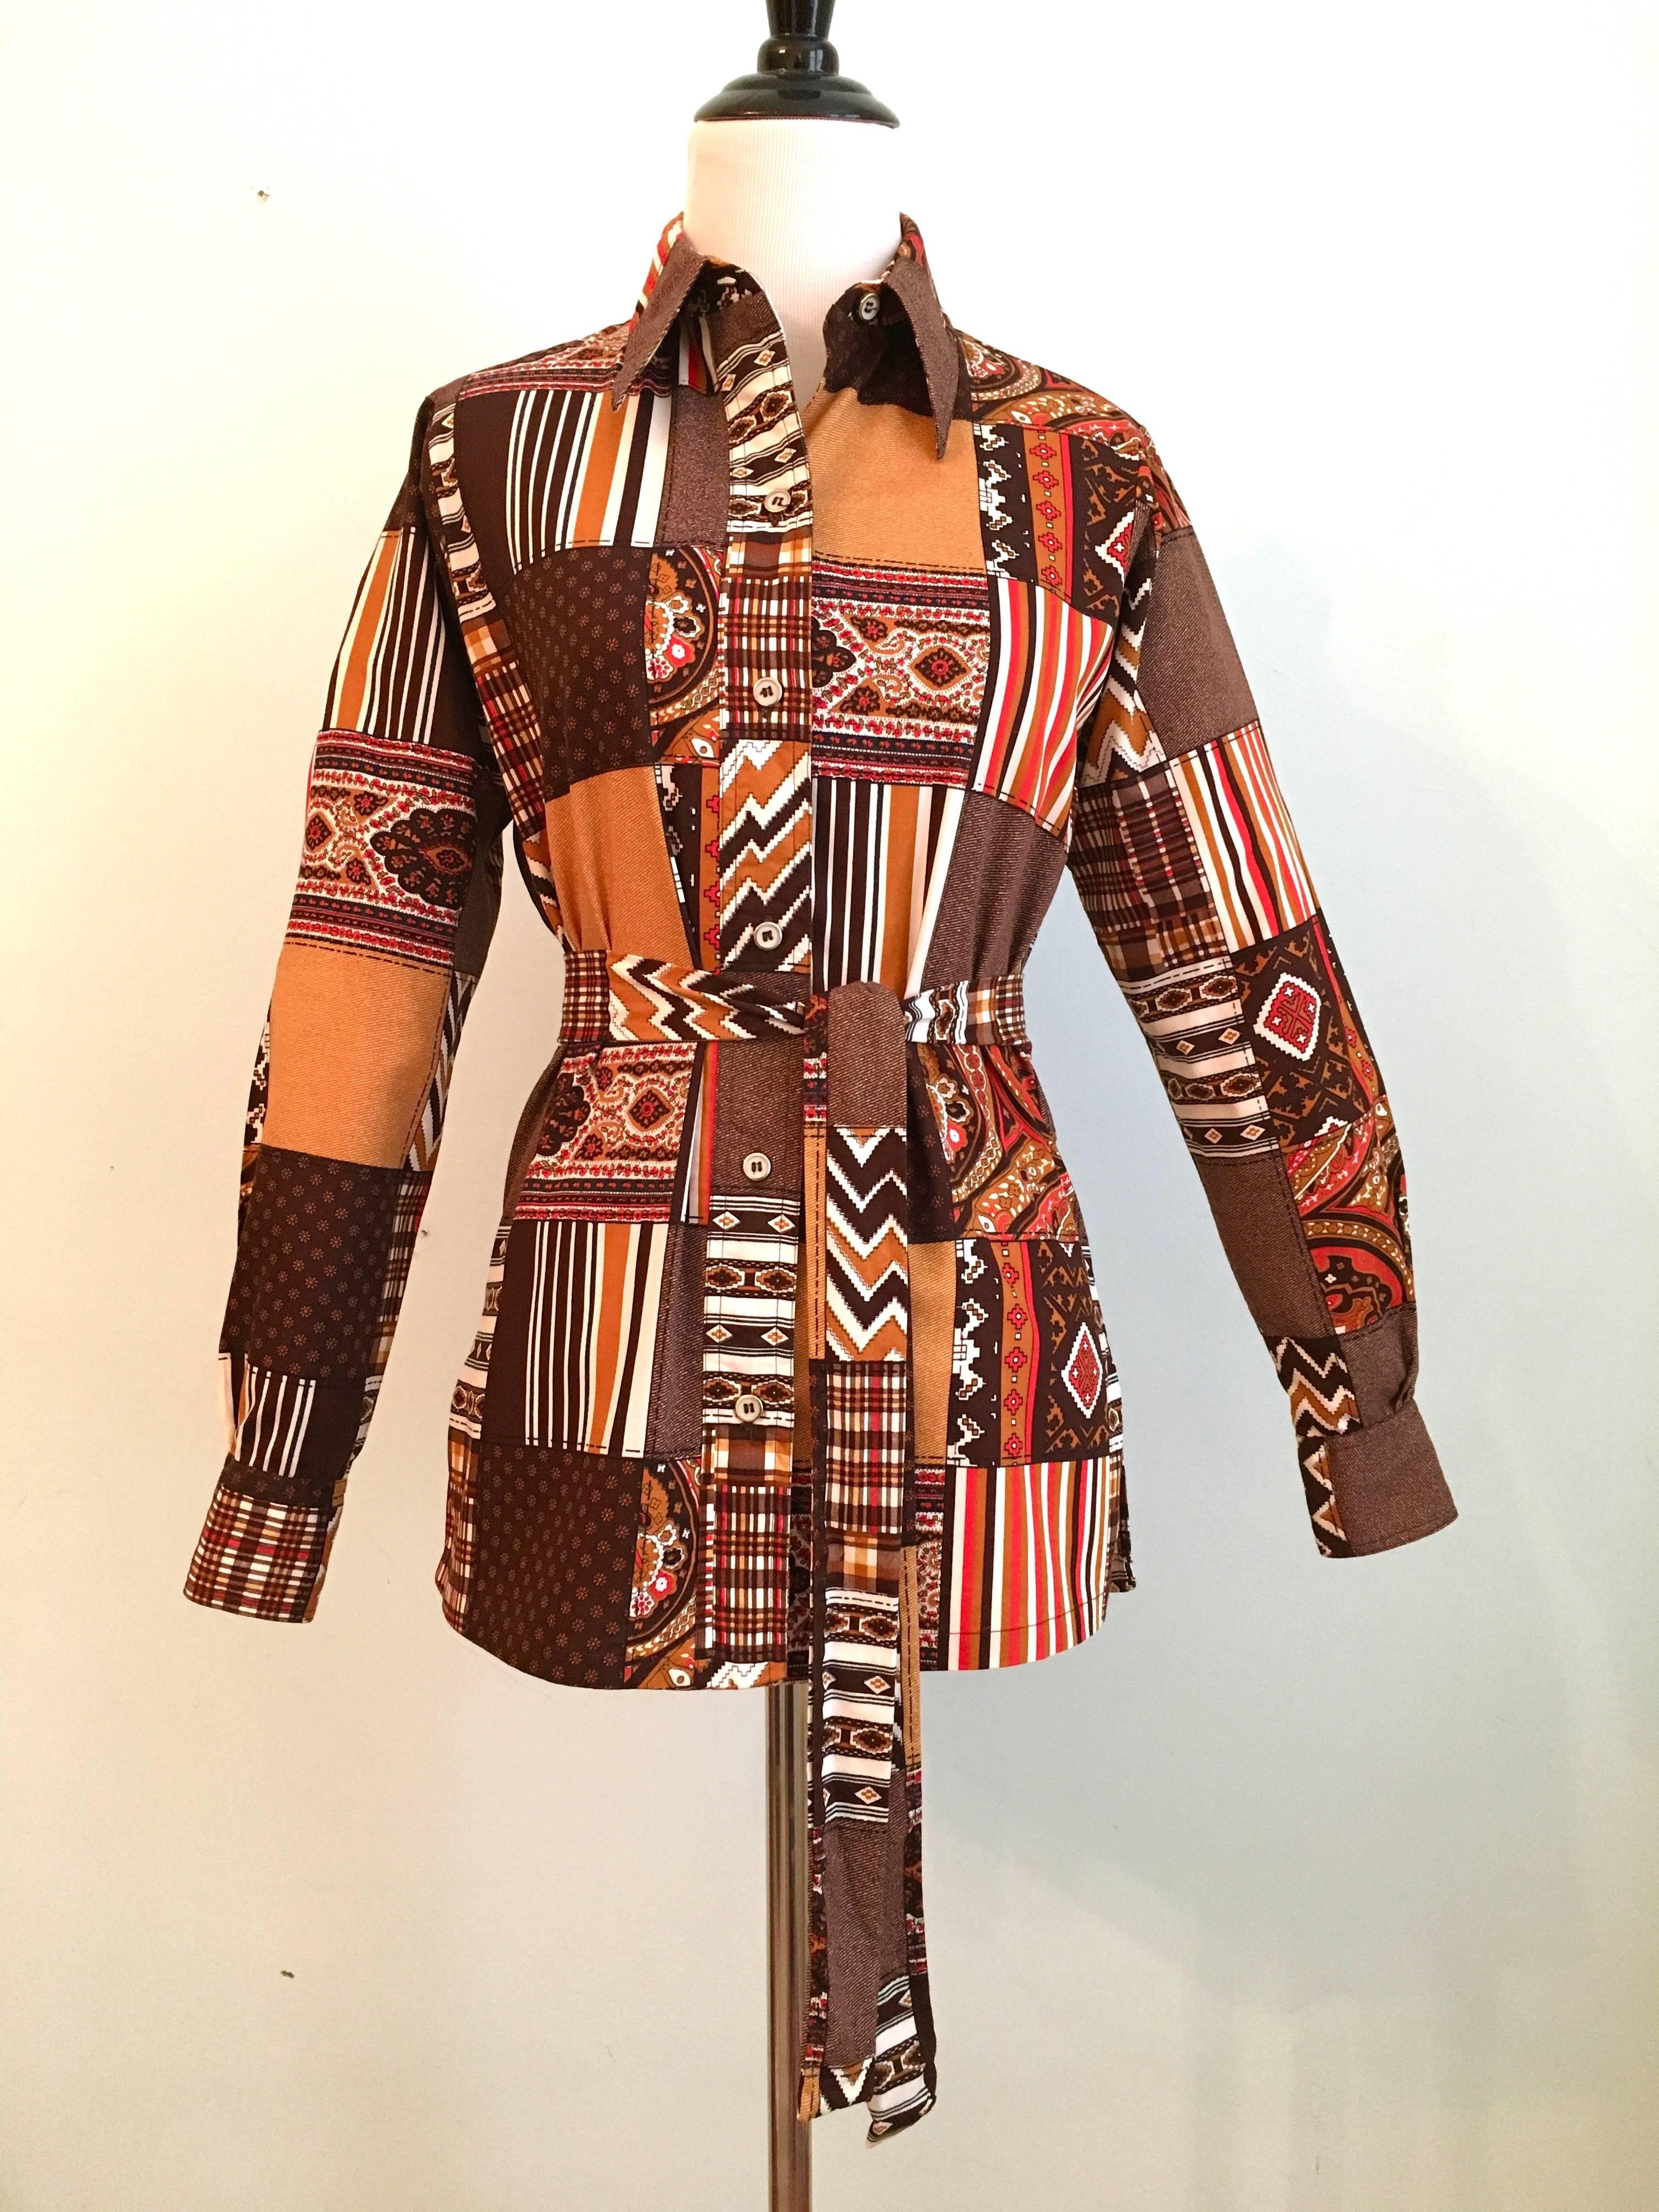 This is a Christian Dior printed patchwork blouse from the 1970s. It is made out of a fabric printed to look as though it is a sewn patchwork fabric. It is marked as a vintage size 8 but actually fits like a modern day size small/extra small. The